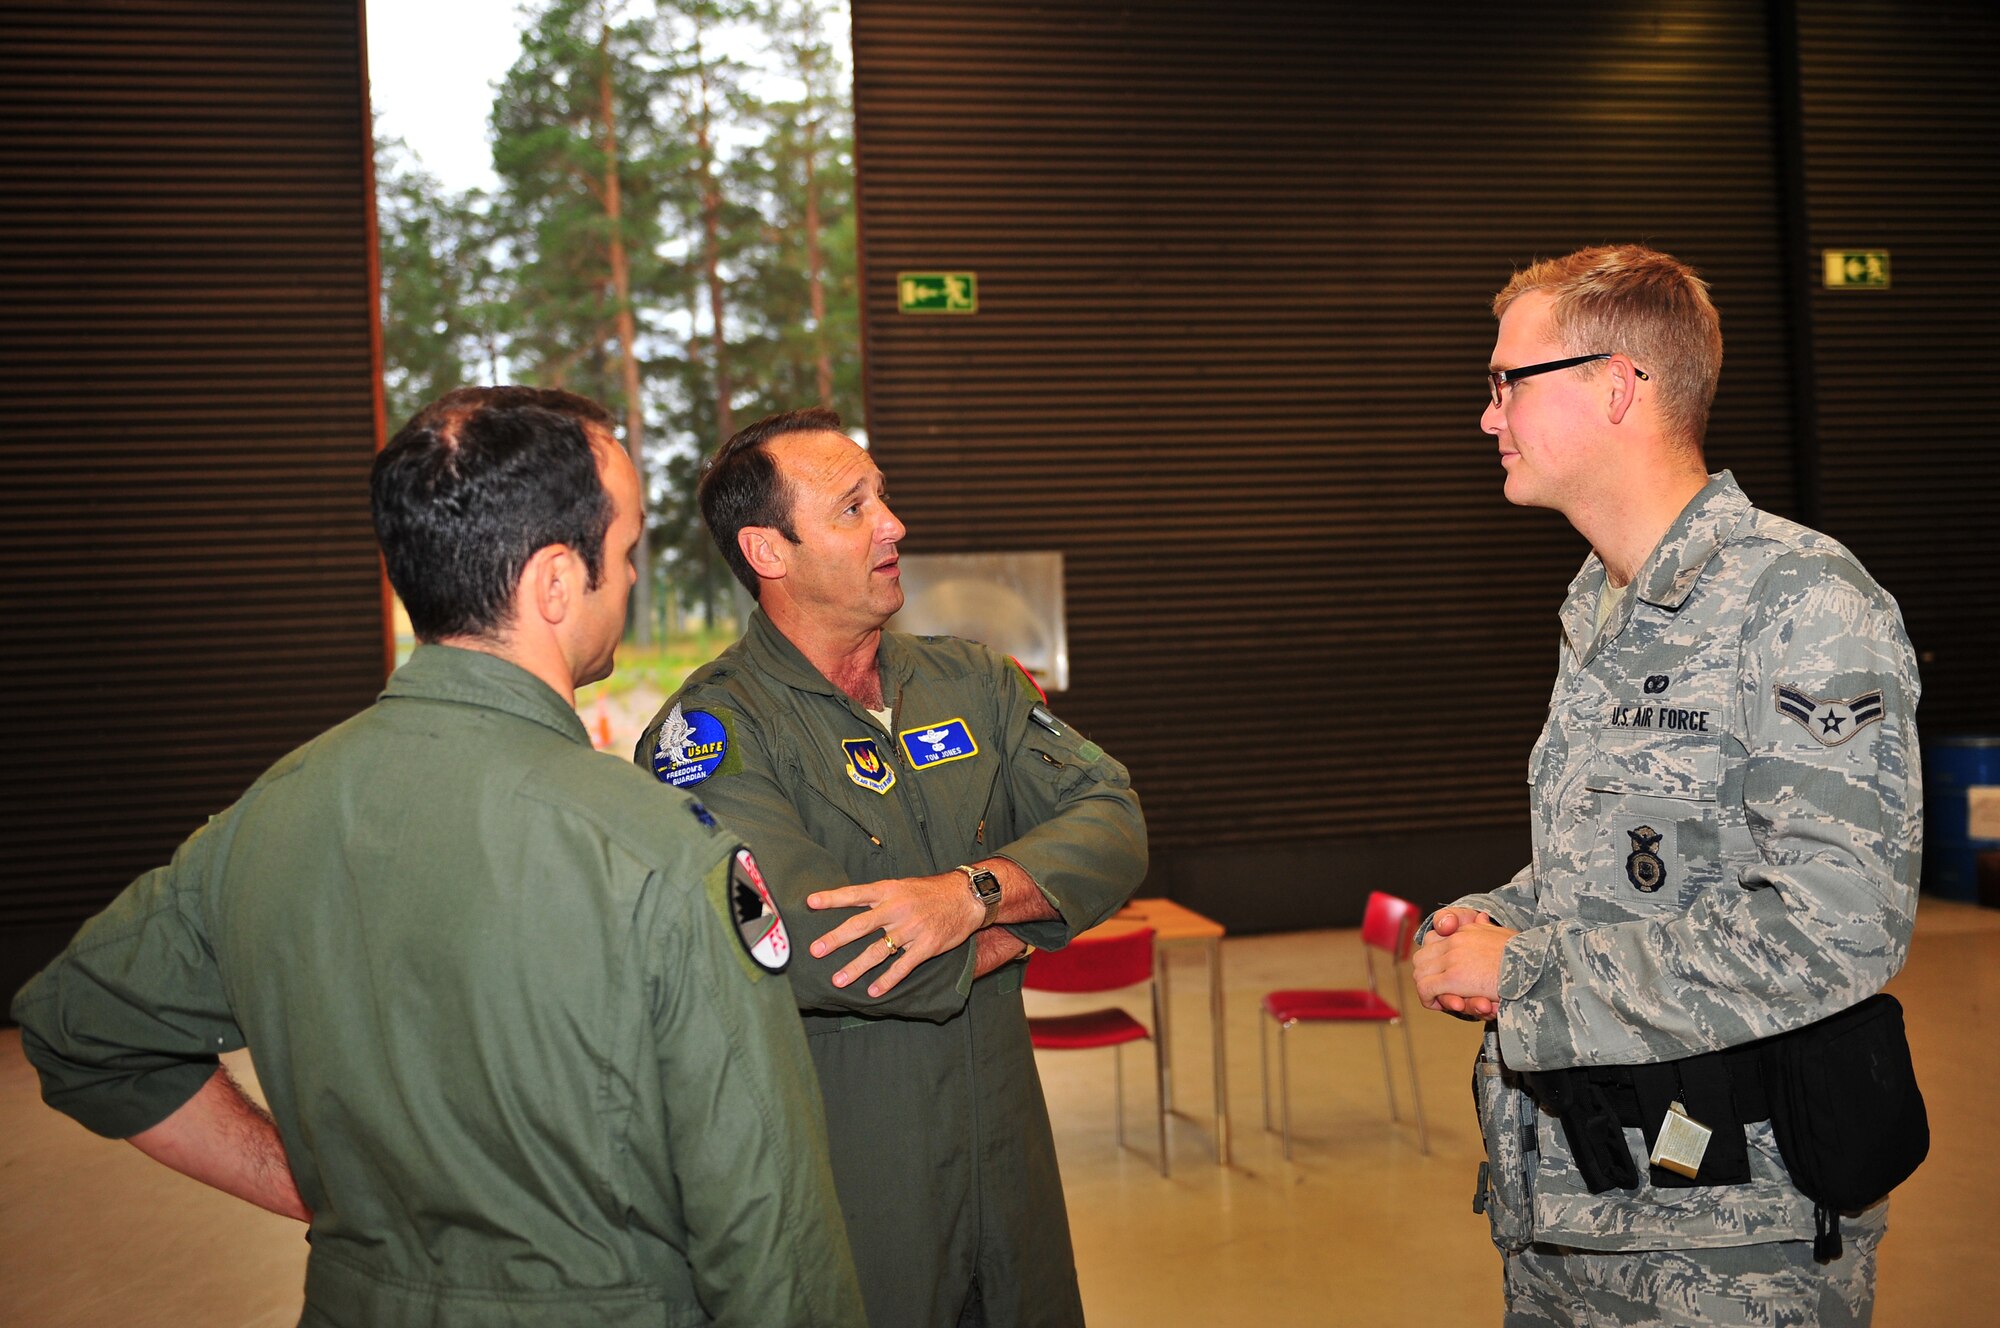 KALLAX AIR BASE, Sweden -- Lt. Gen. Tom Jones, left, U.S. Air Forces in Europe vice commander, talks to Airman 1st Class Andrew Trautmann, 52nd Security Forces Squadon patrolman, here Sept. 4 about Trautmann's experience during his incentive flight in an F-16 Fighting Falcon during the Nordic Air Meet 2012. The multinational training exercise brought together more than 50 aircraft from the United States, United Kingdom, Denmark, Finland, Switzerland and Sweden to participate in tactical role-playing training missions. The three week exercise enabled the different nations to exchange aerial tactics and capabilities to improve combat power effectiveness in solo and joint environments while building and strengthening international partnerships. (U.S. Air Force Photo by Airman 1st Class Dillon Davis/Released)